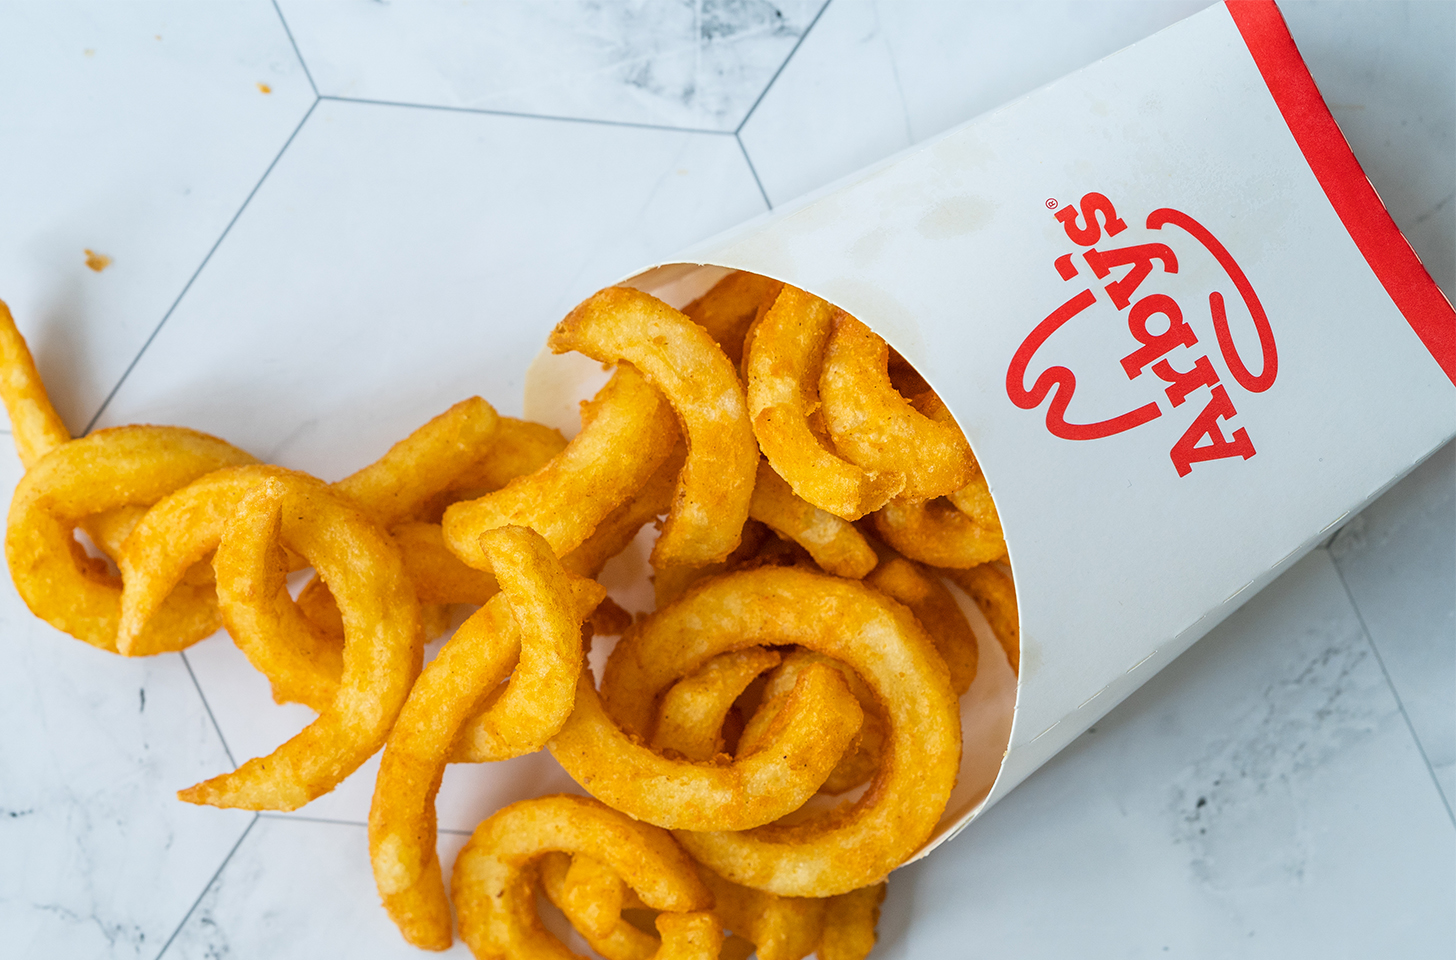 An order of Arby's curly cue fries